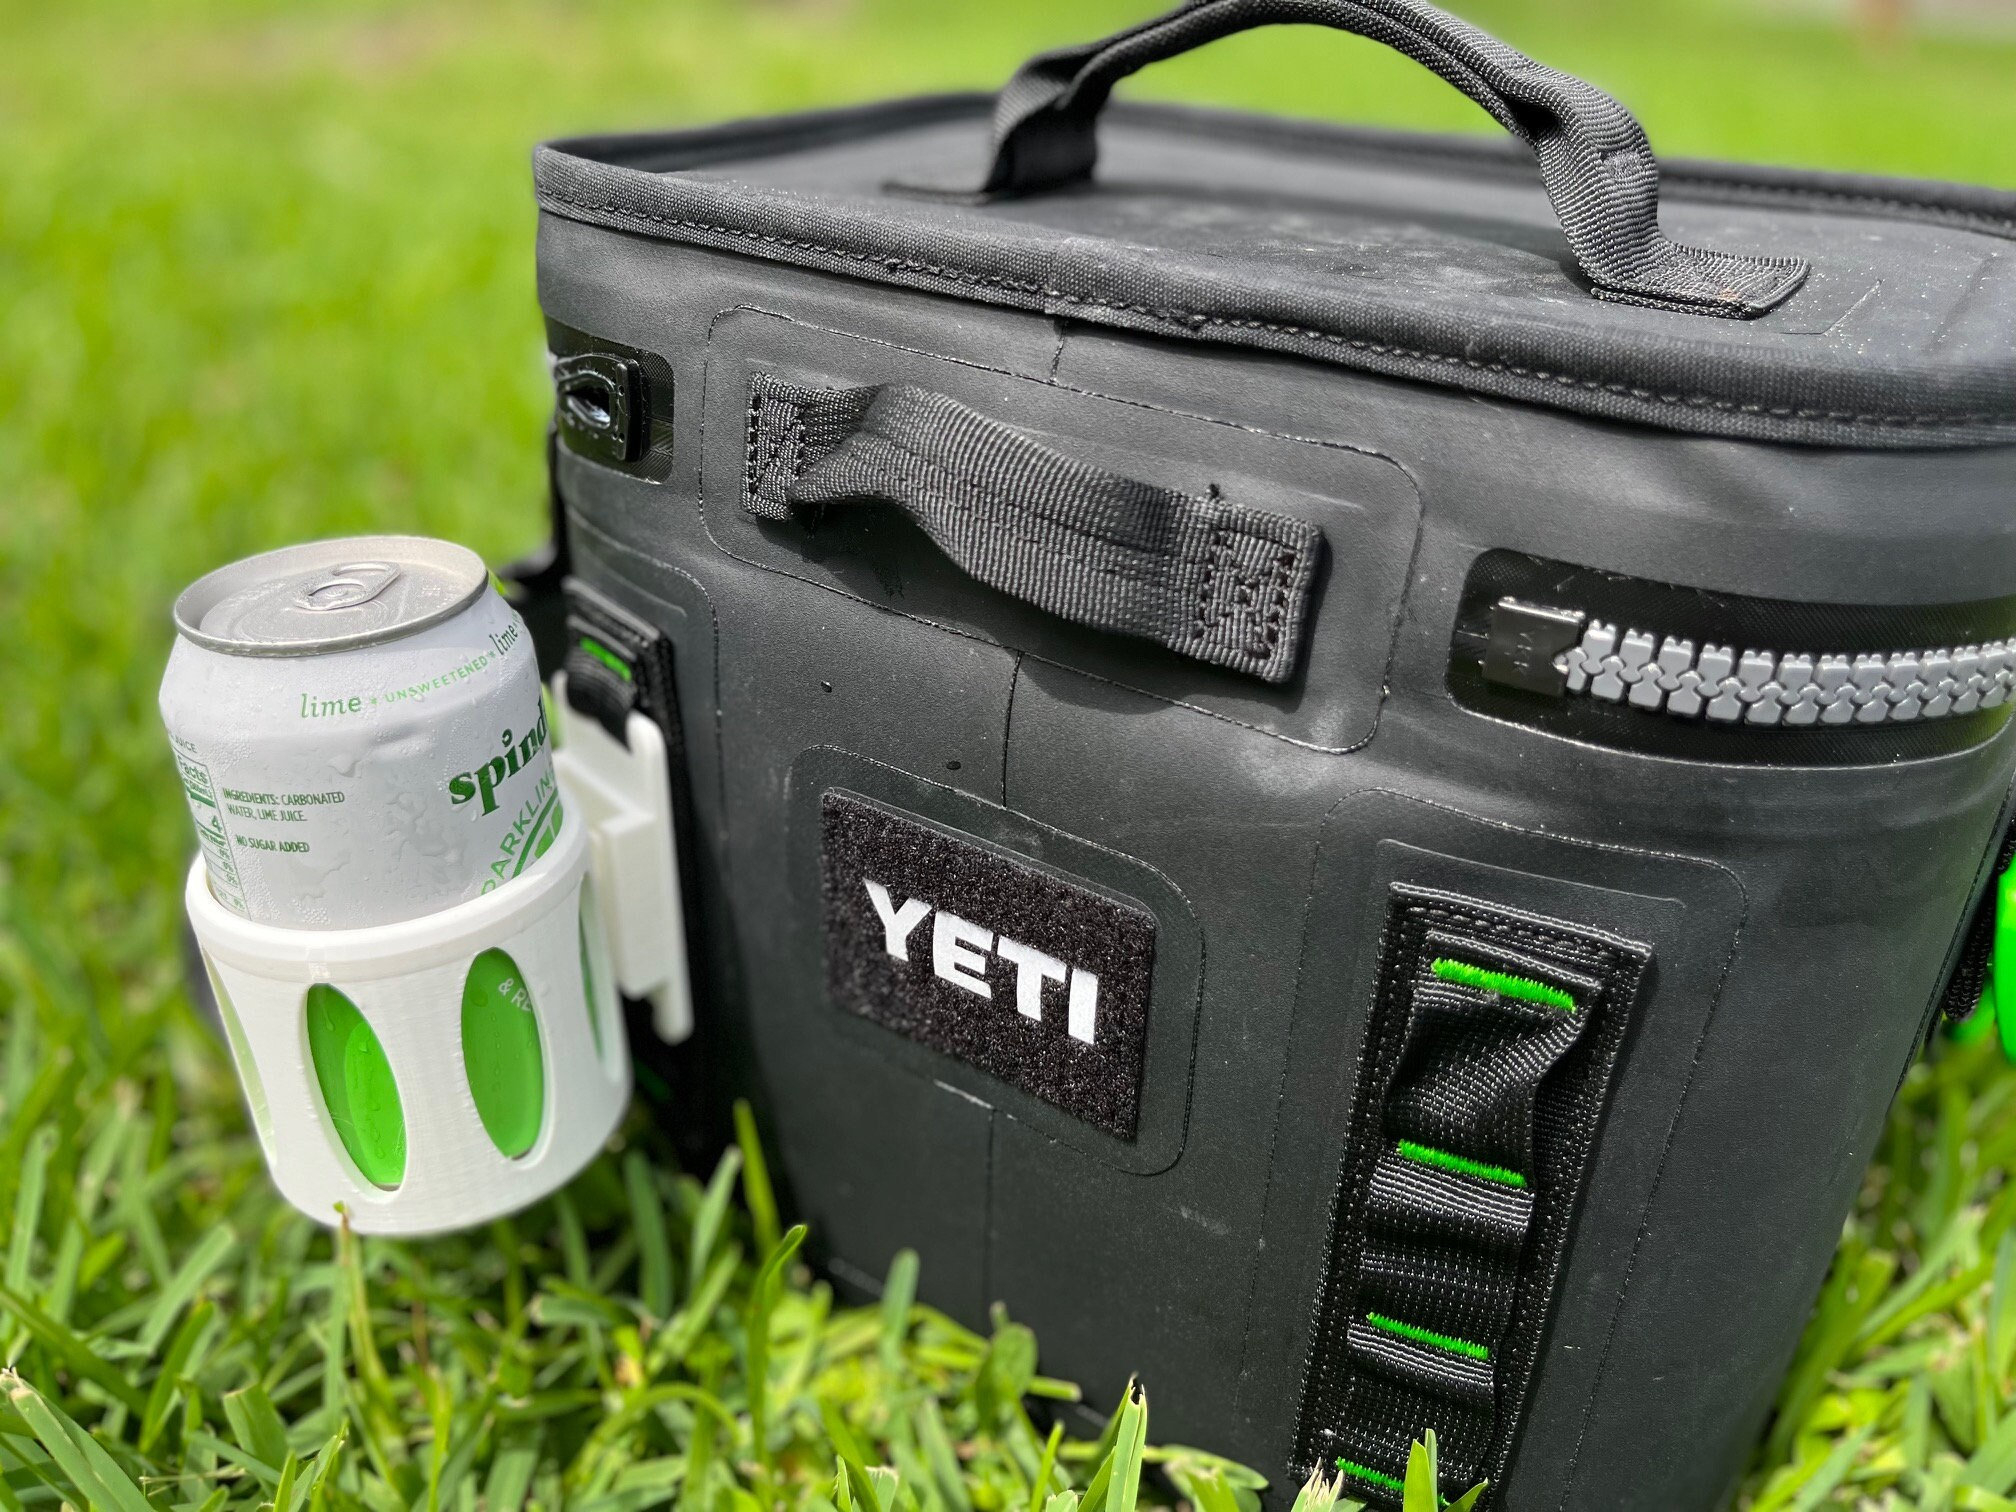 Drink Holder for YETI Tundra Coolers 